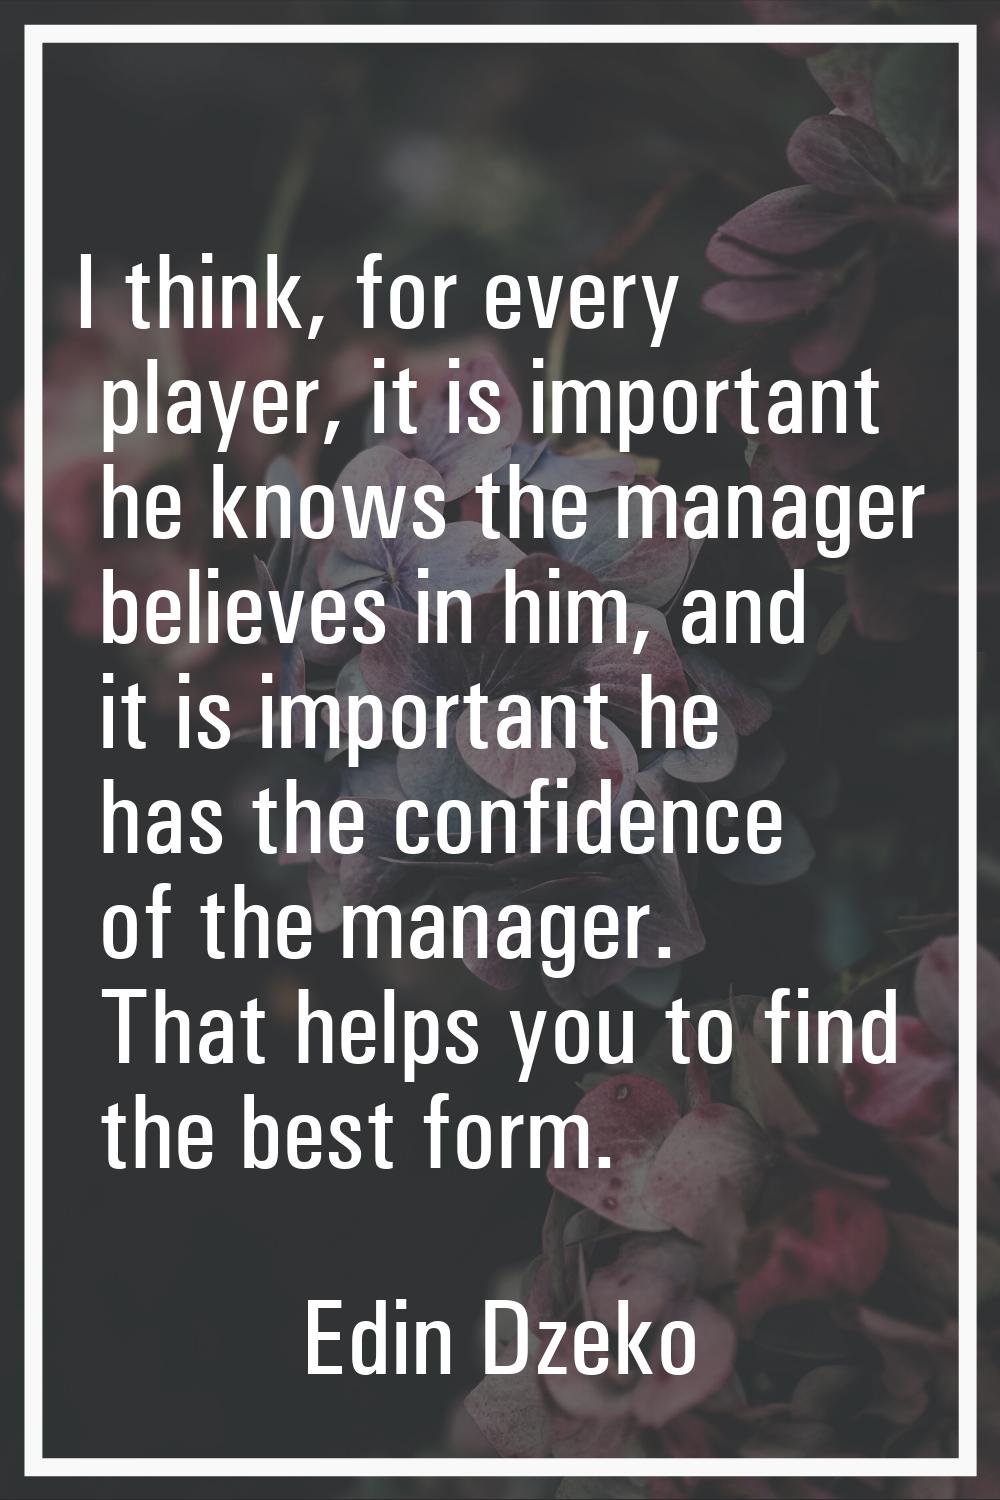 I think, for every player, it is important he knows the manager believes in him, and it is importan